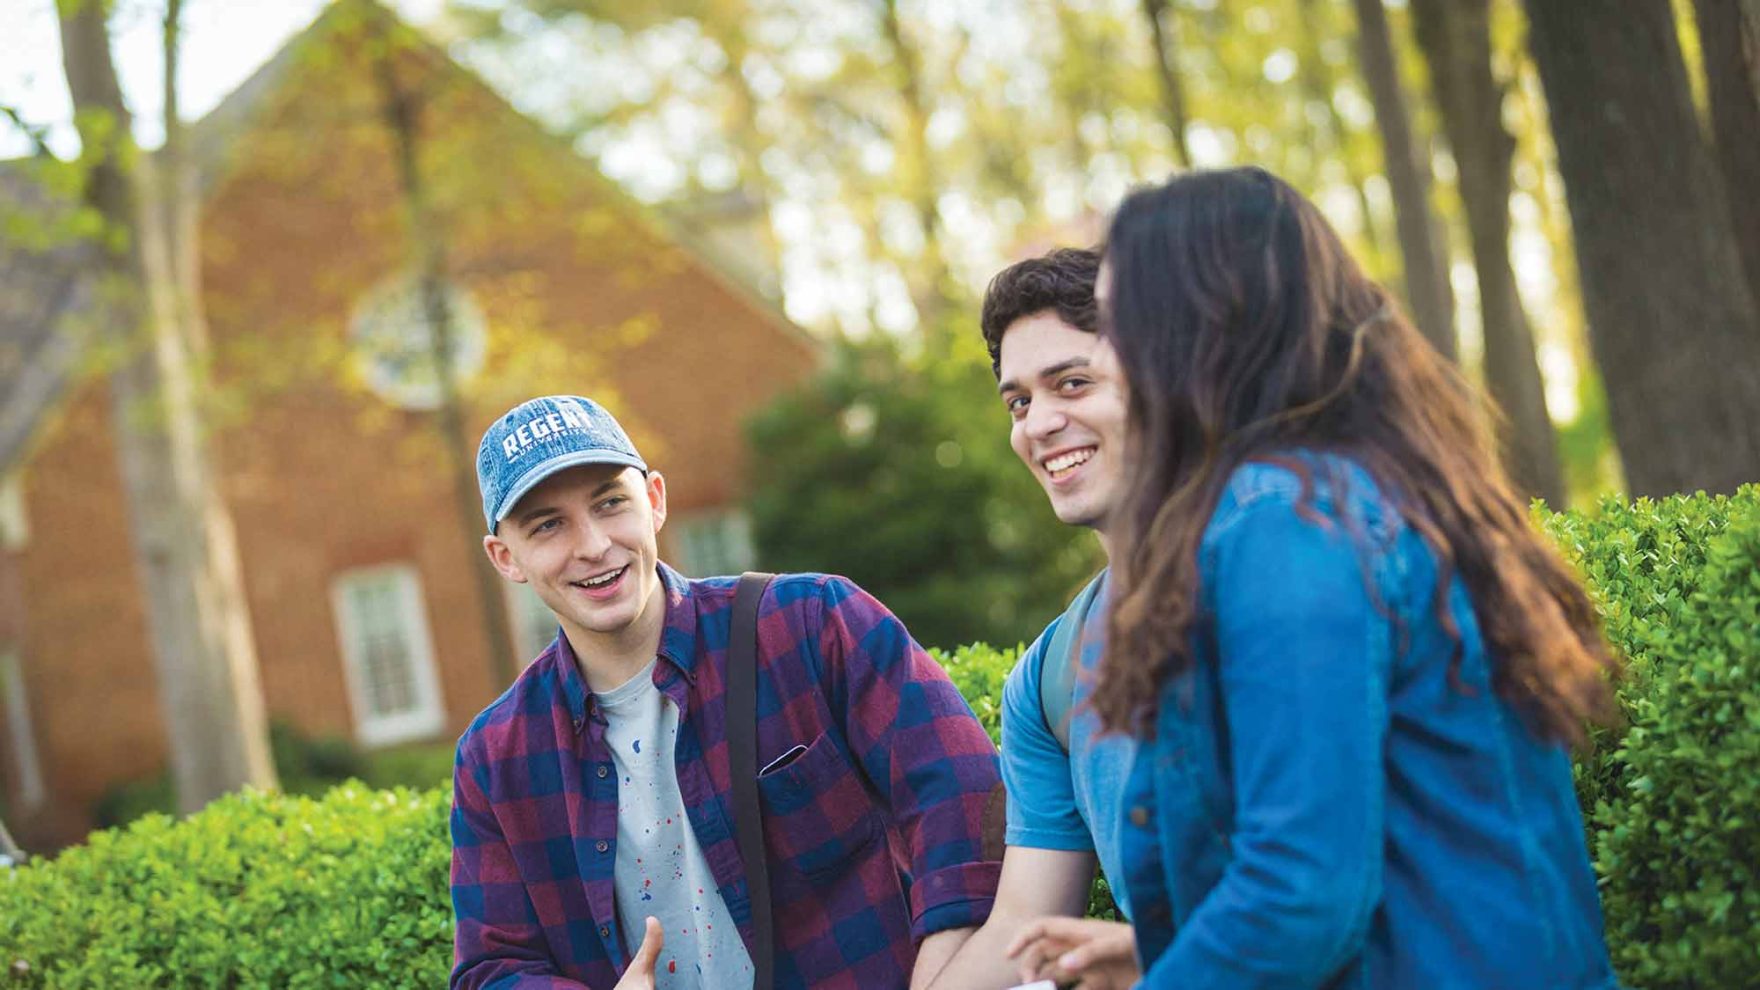 Students at Regent University: Learn why college is important.